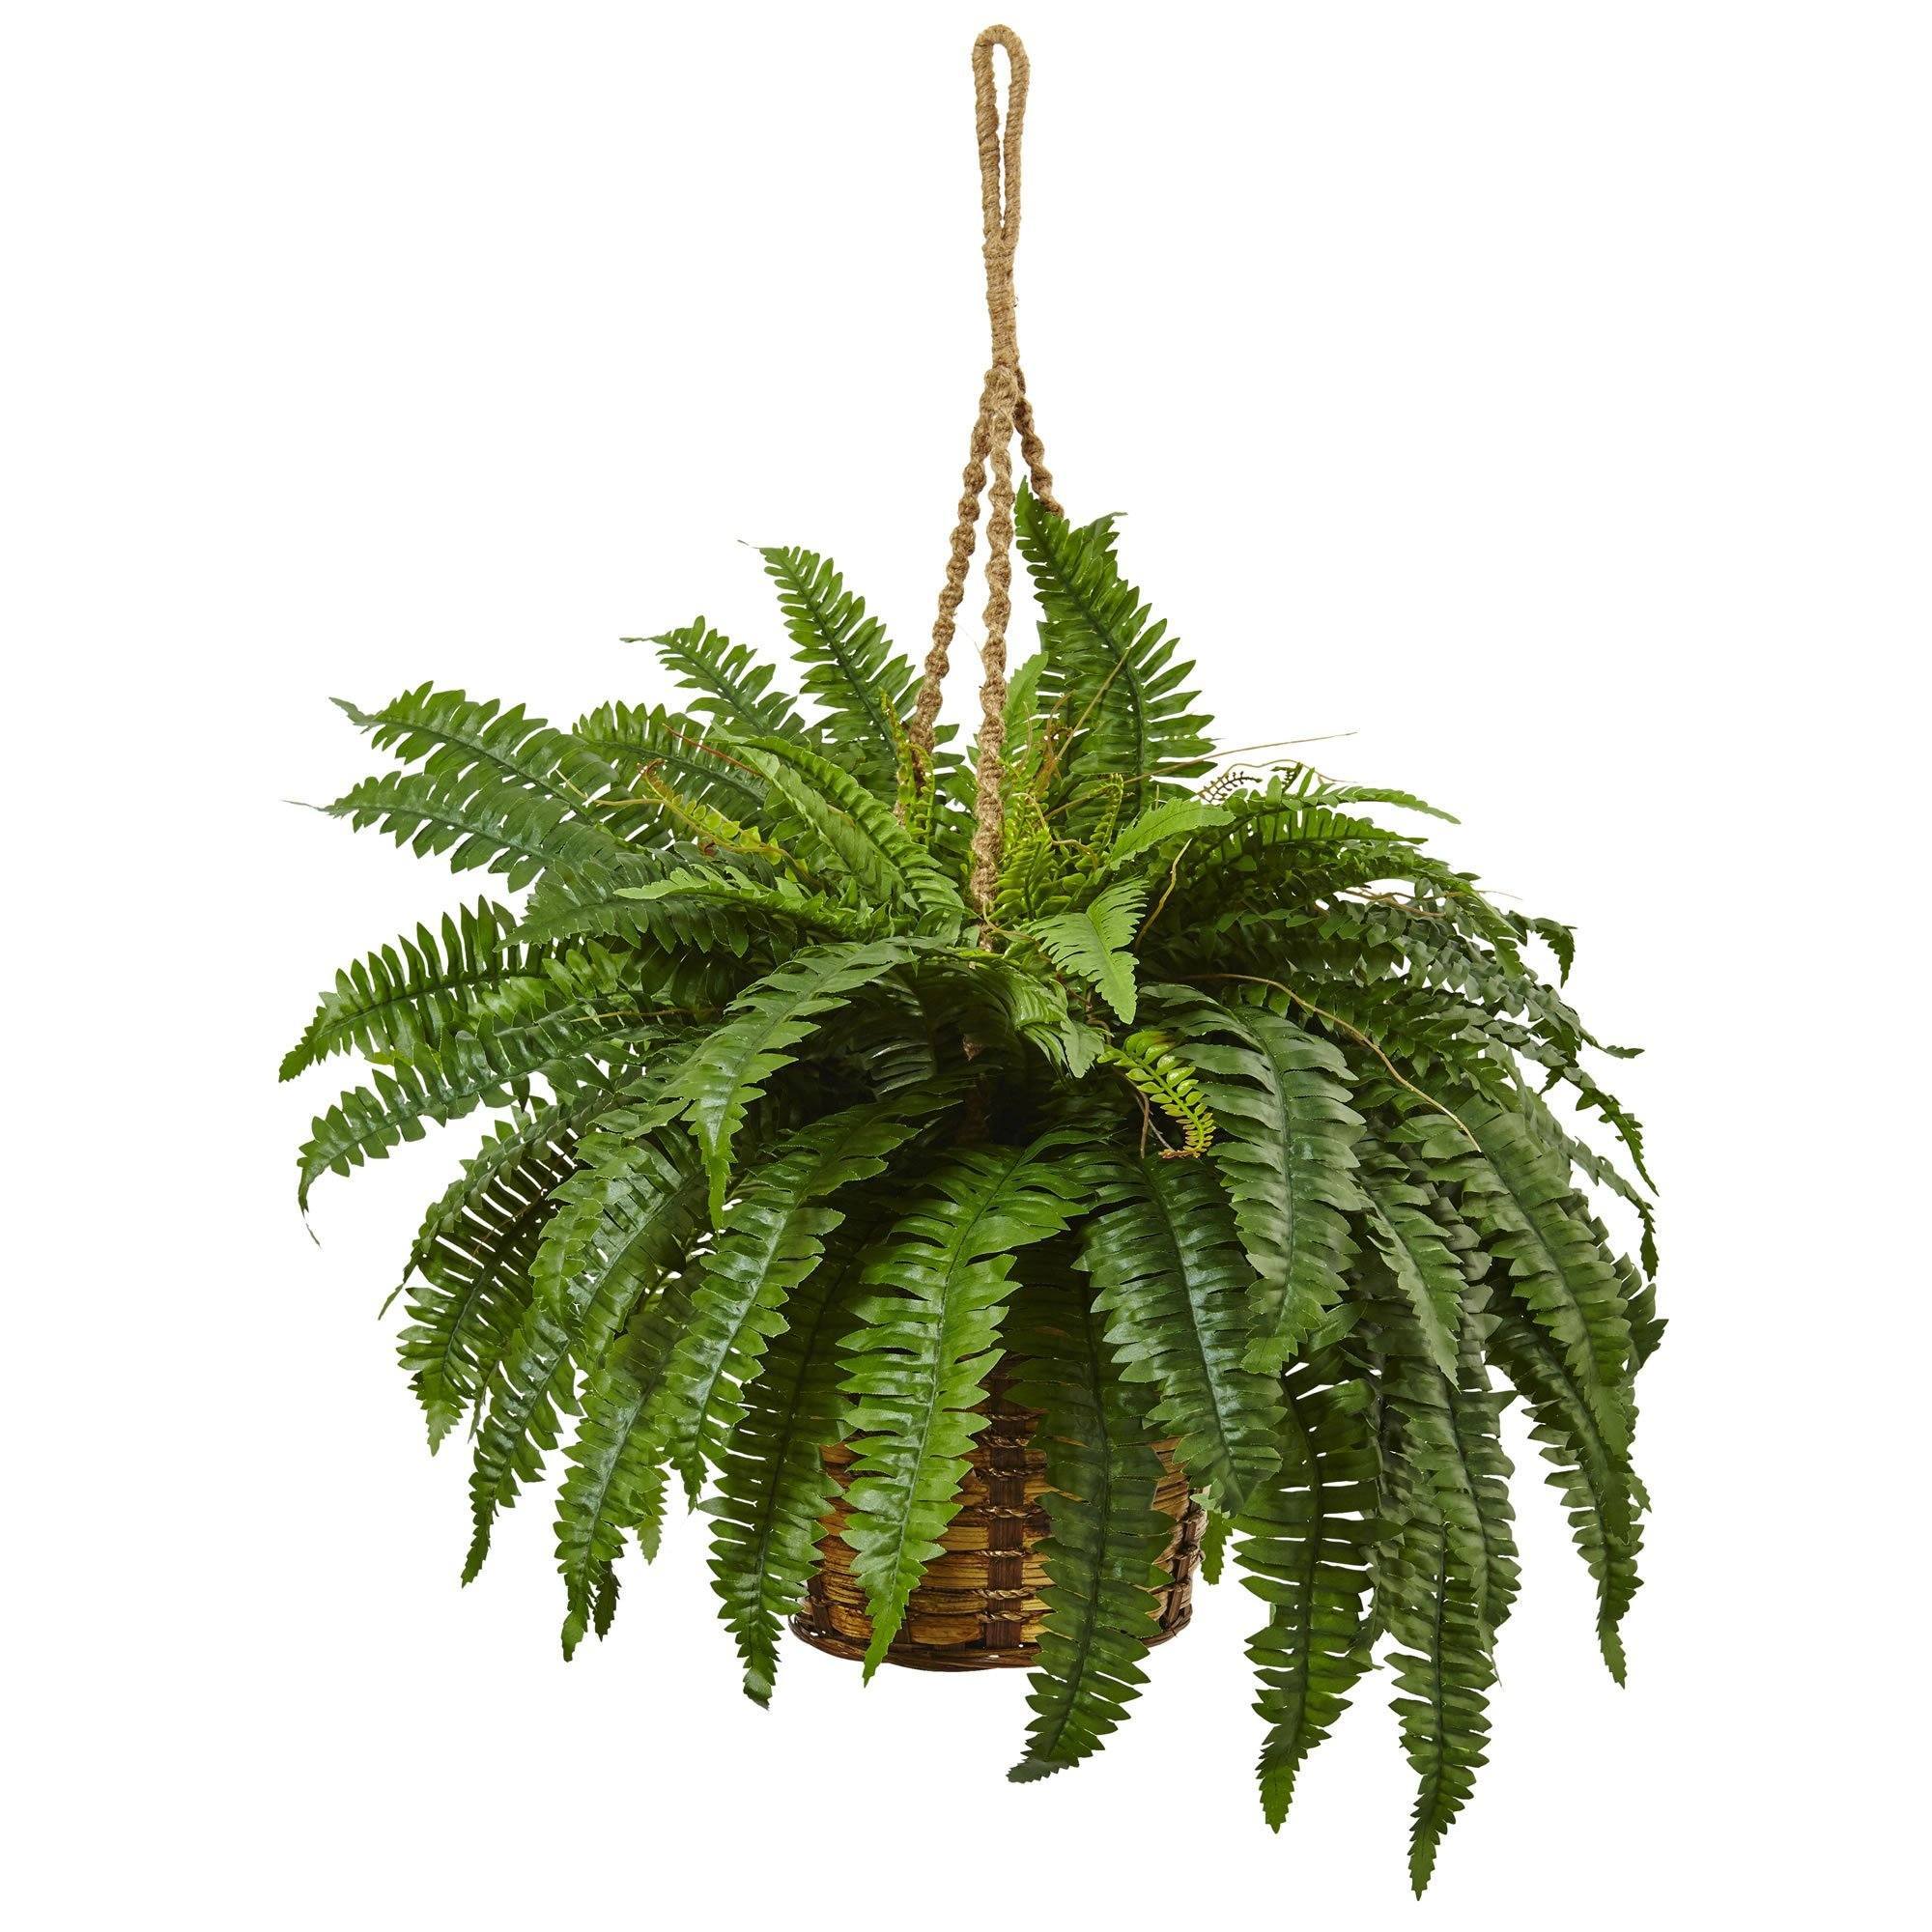 Artificial Arrangement - 29" Boston Fern Hanging Basket" by Nearly Natural